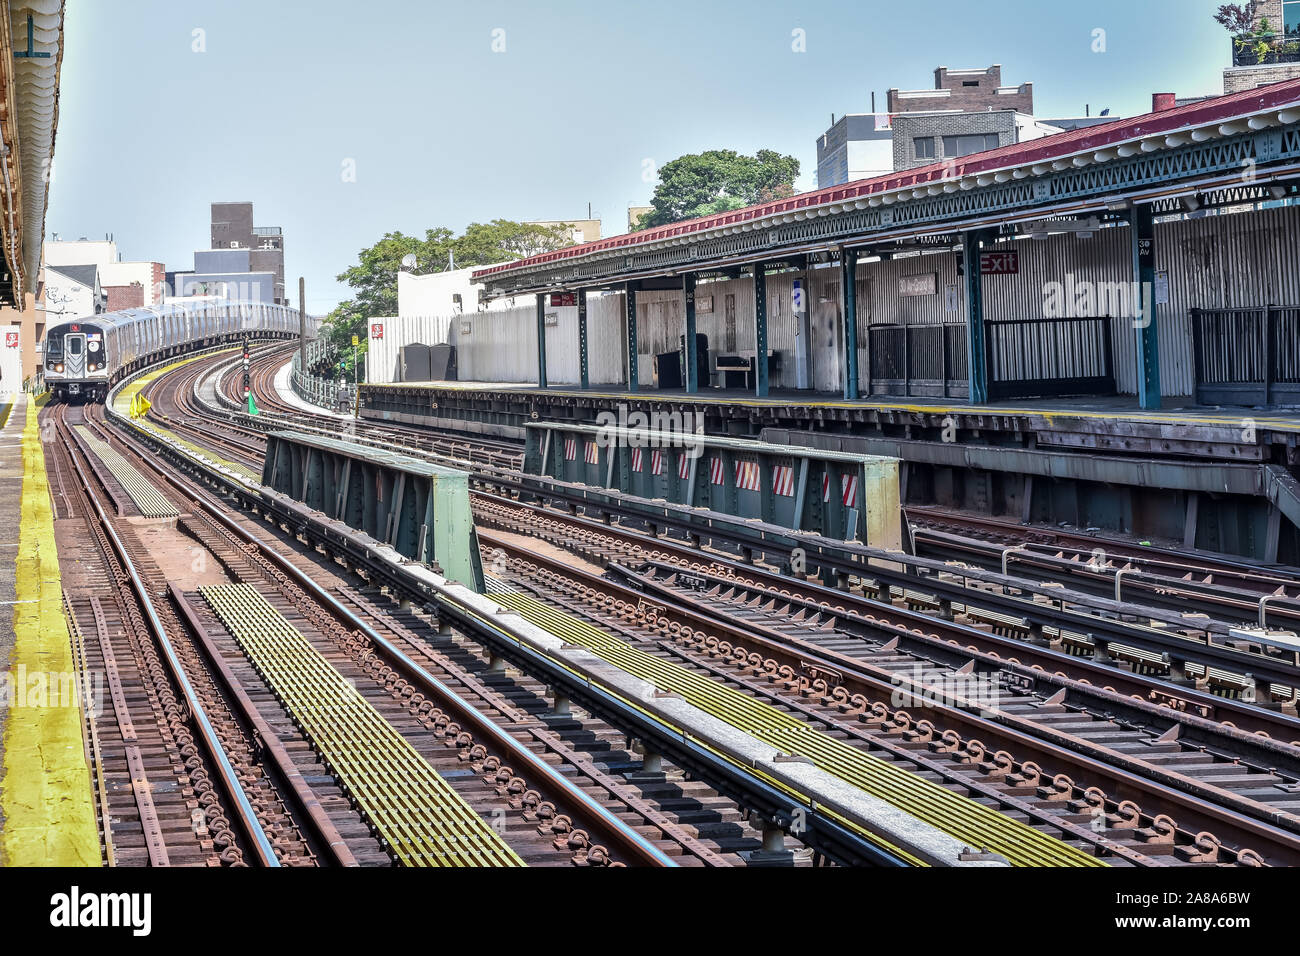 Train arriving at the station in New York City. Buildings in the background, cityscape. Travel and transit concept. Manhattan, NYC, USA. Stock Photo